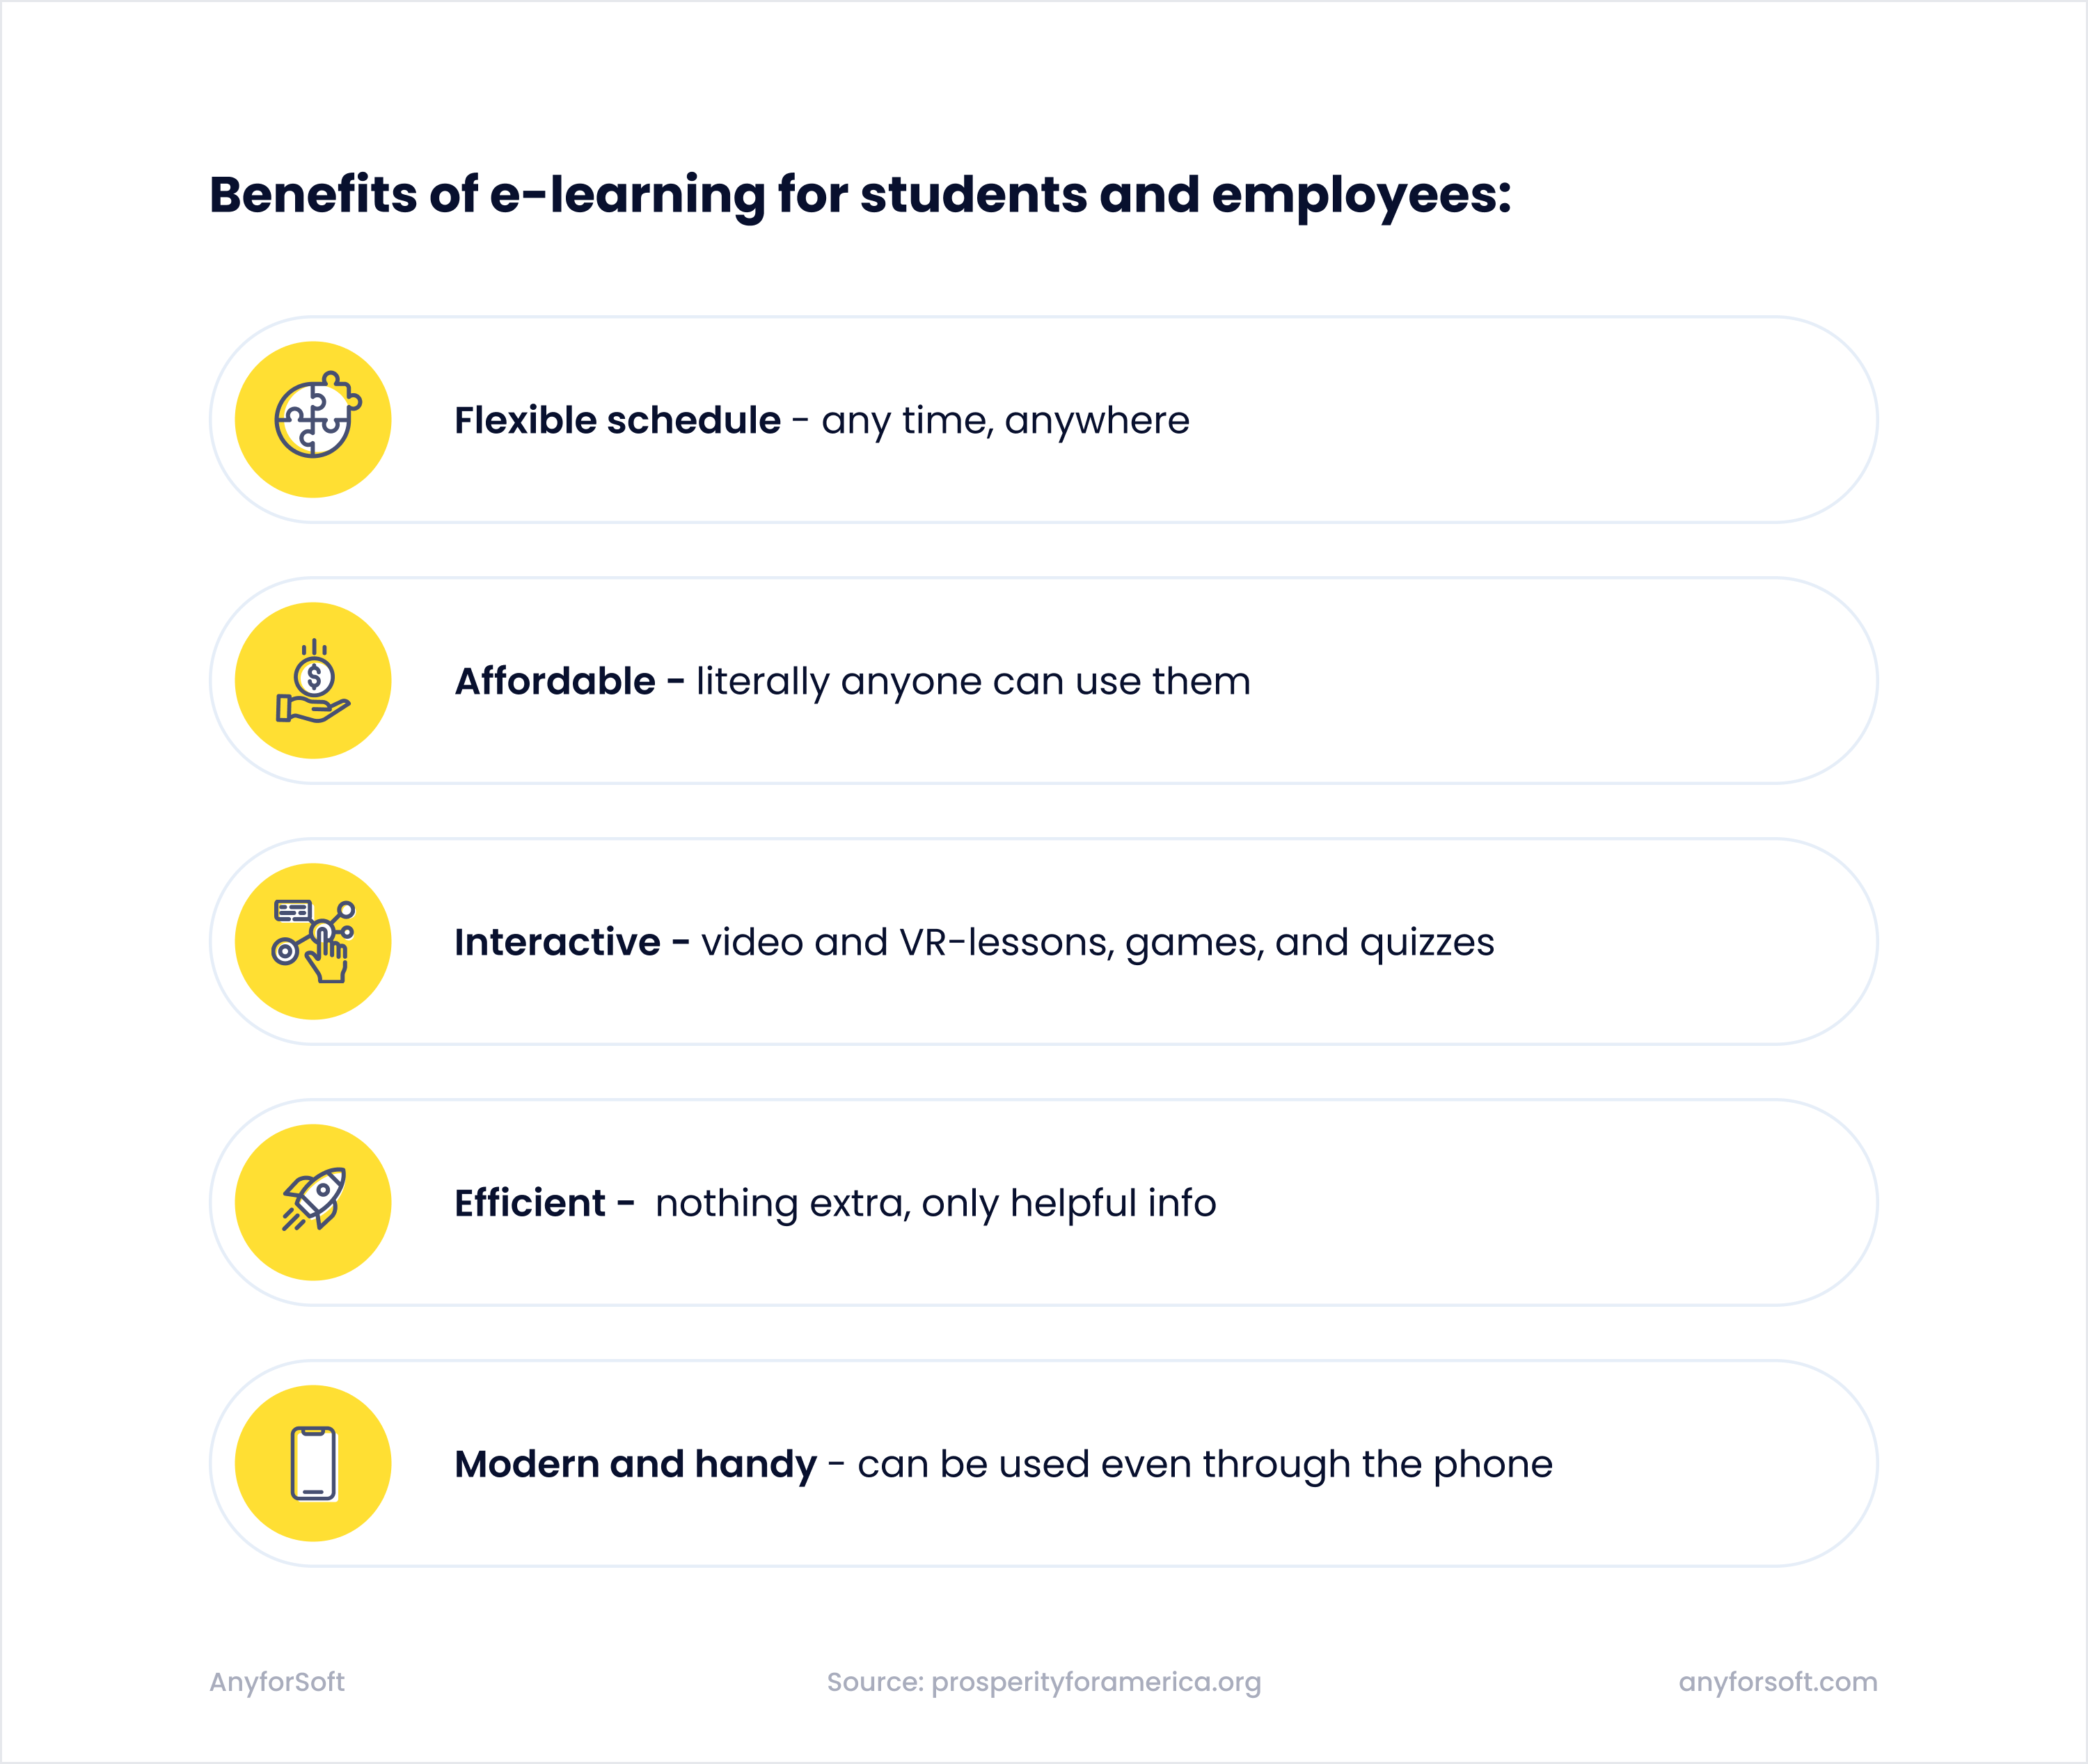 Benefits of e-learning for students and employees